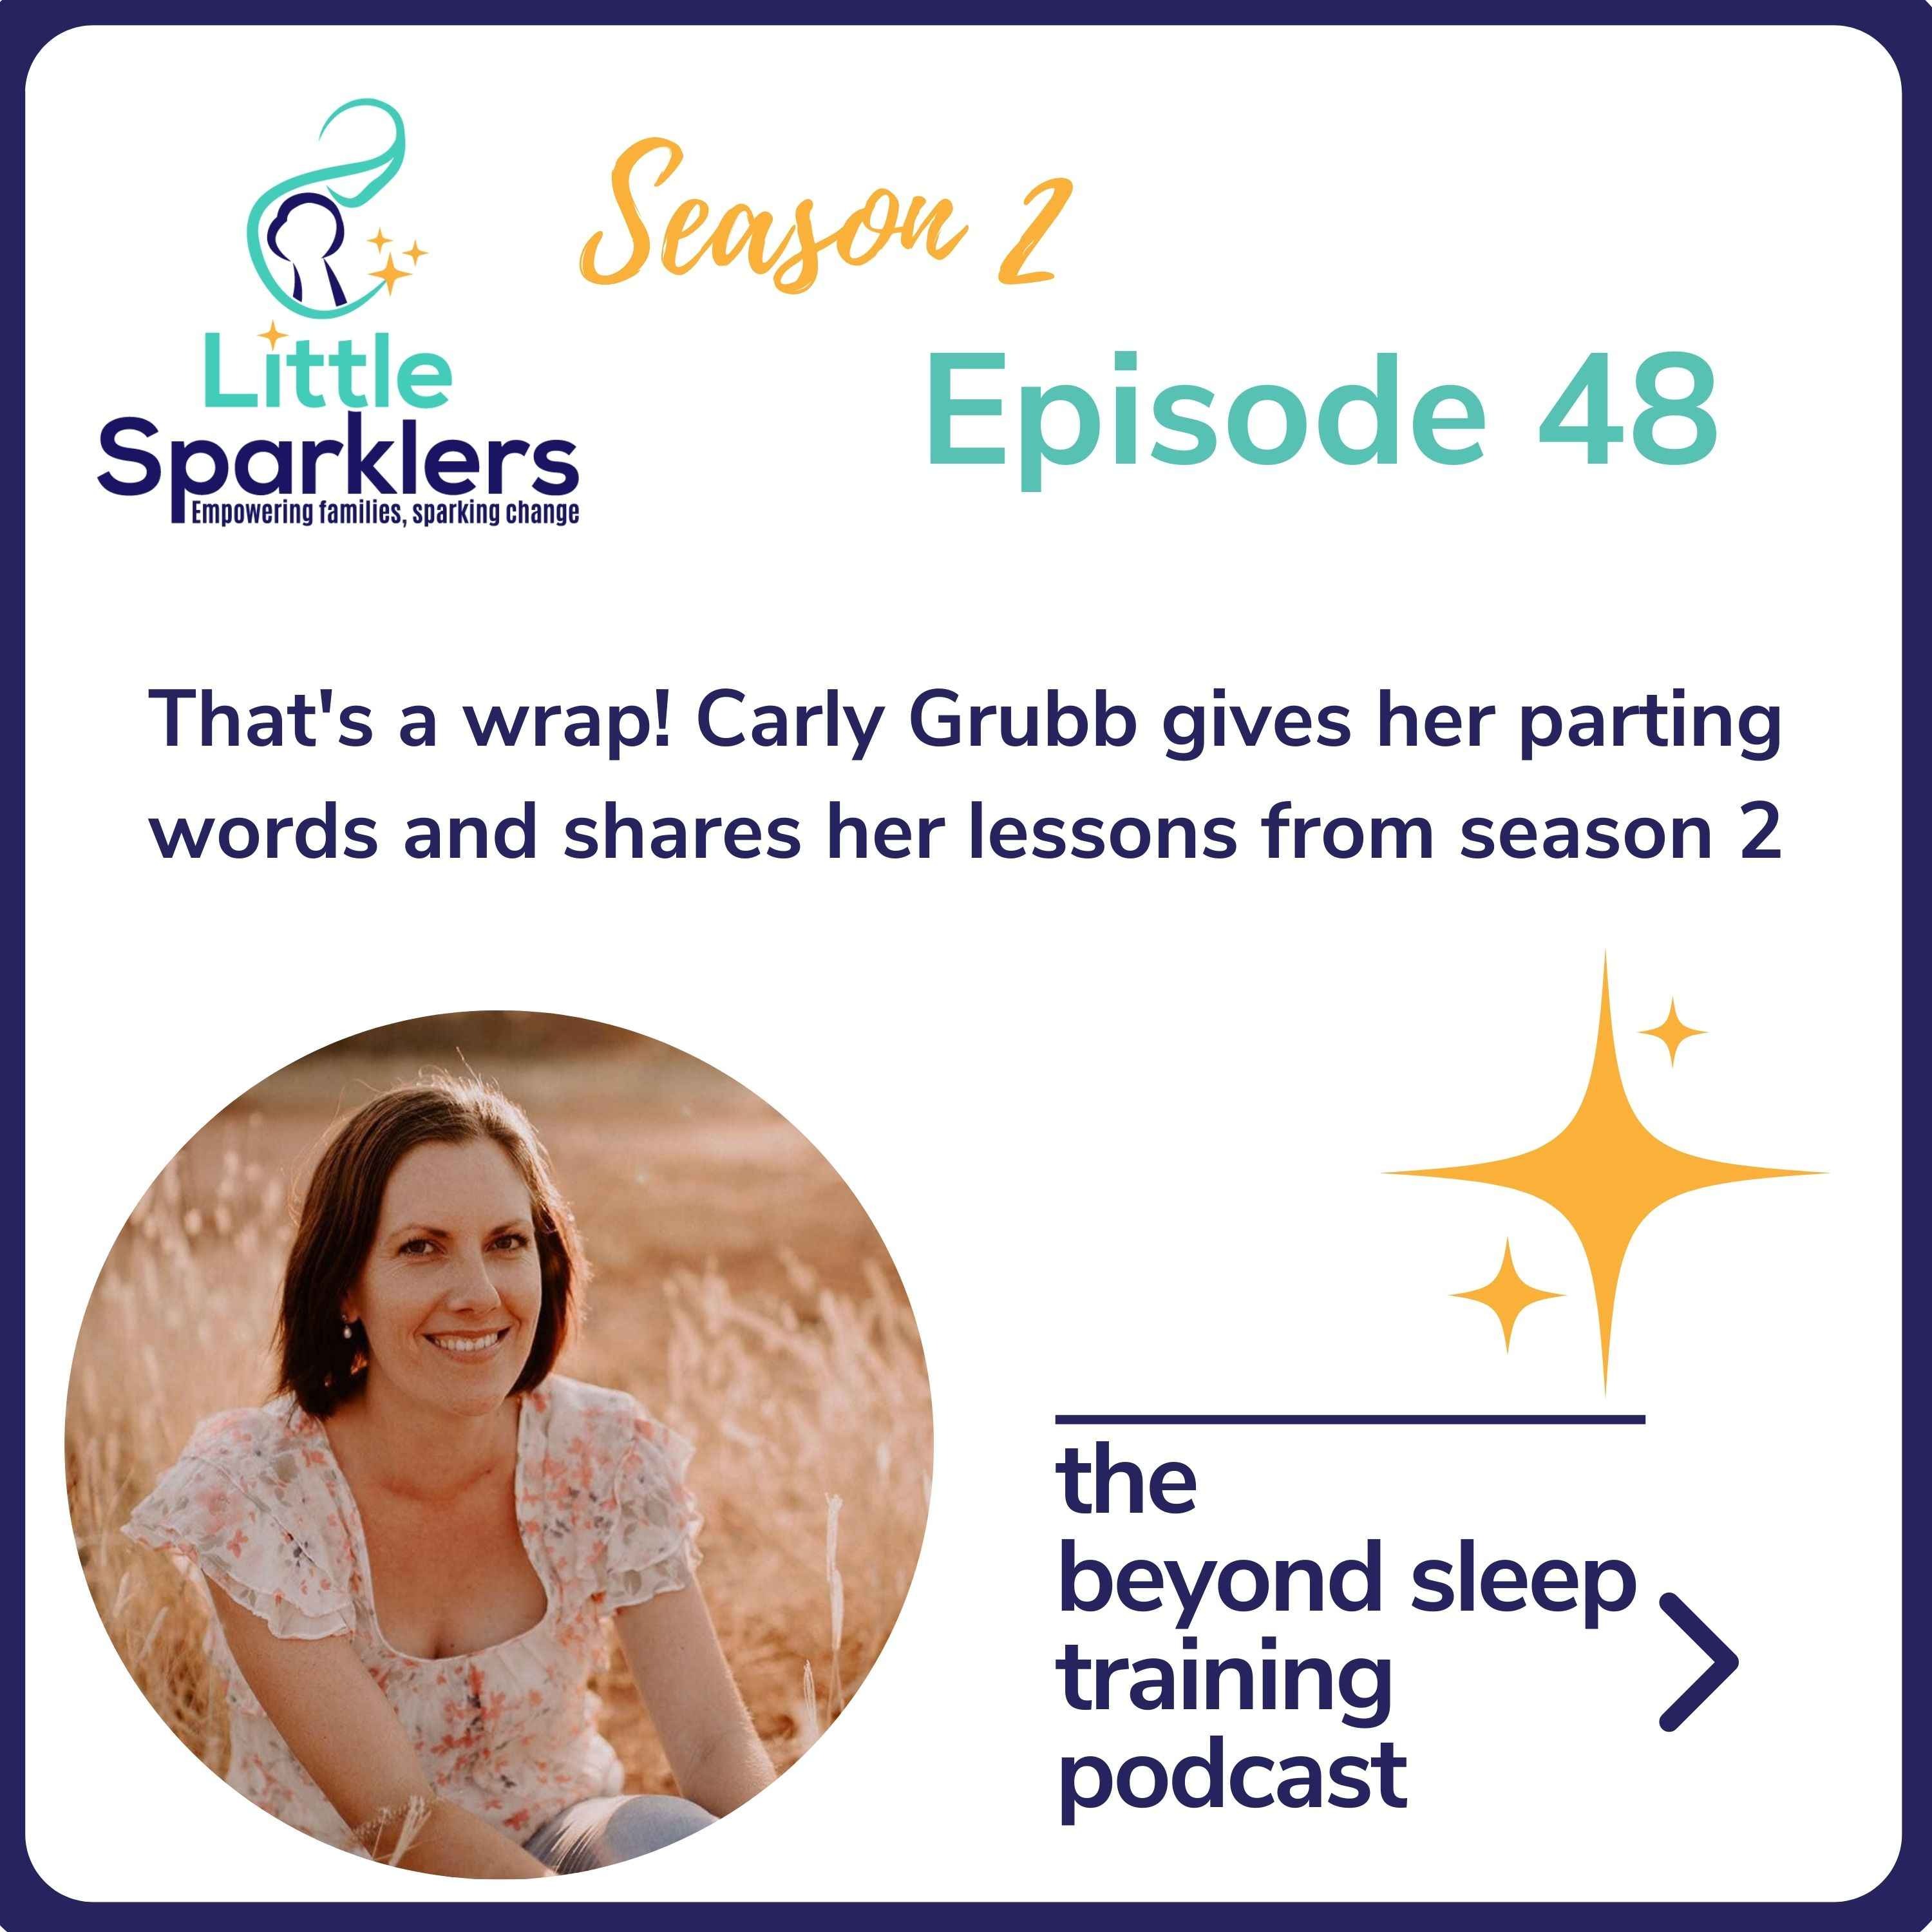 That's a wrap! Carly Grubb gives her parting words and shares her lessons from season 2